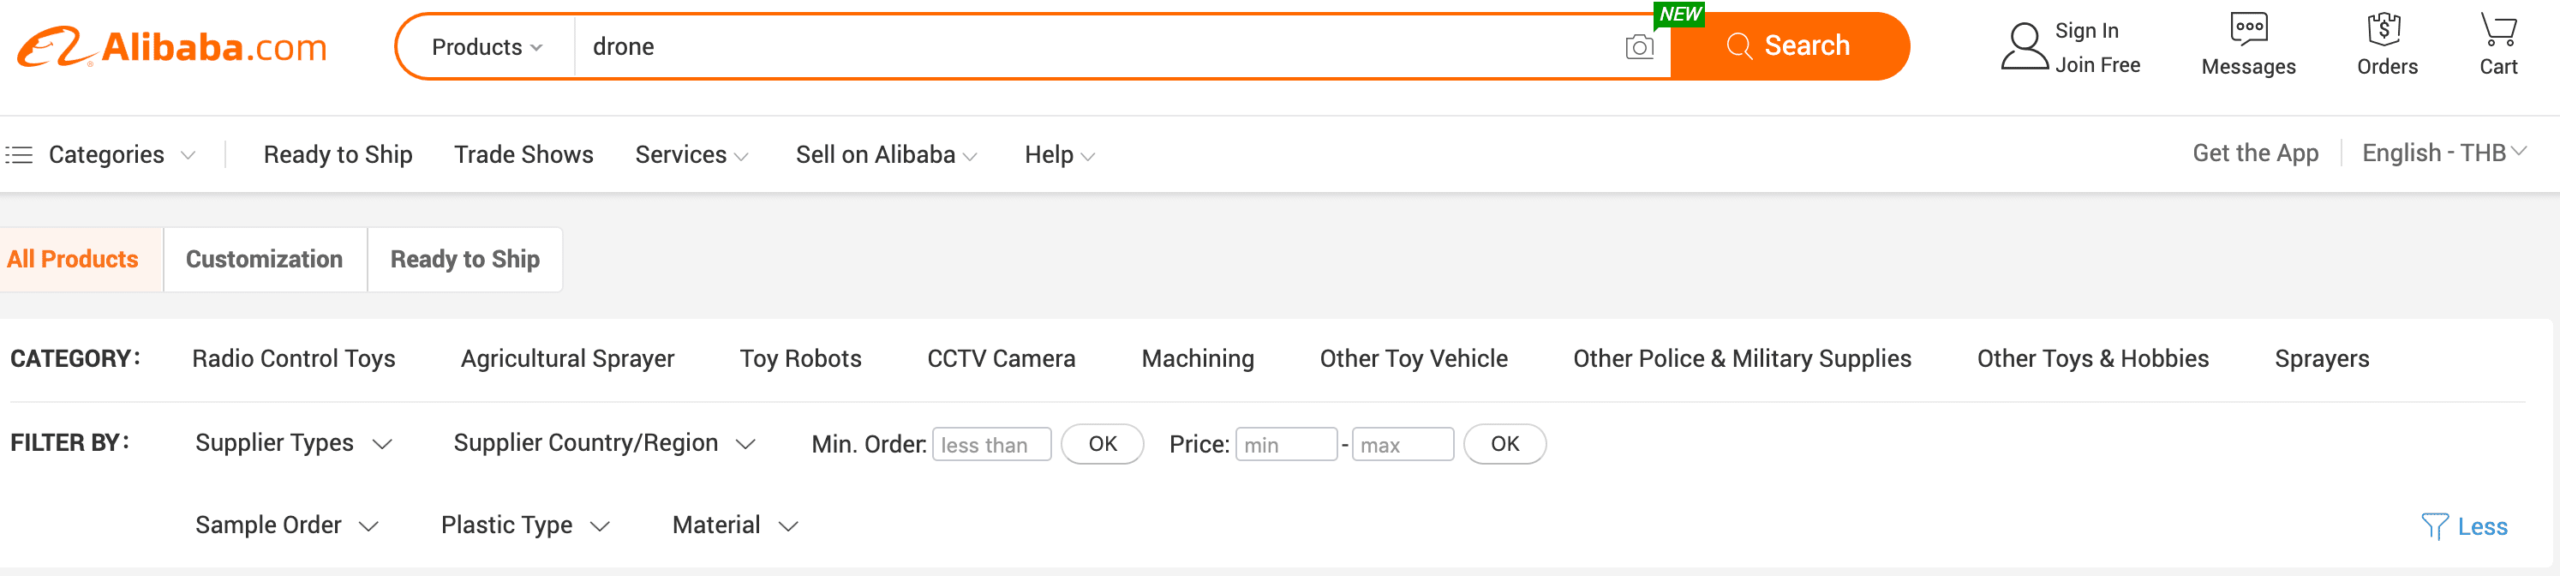 filter alibaba search product